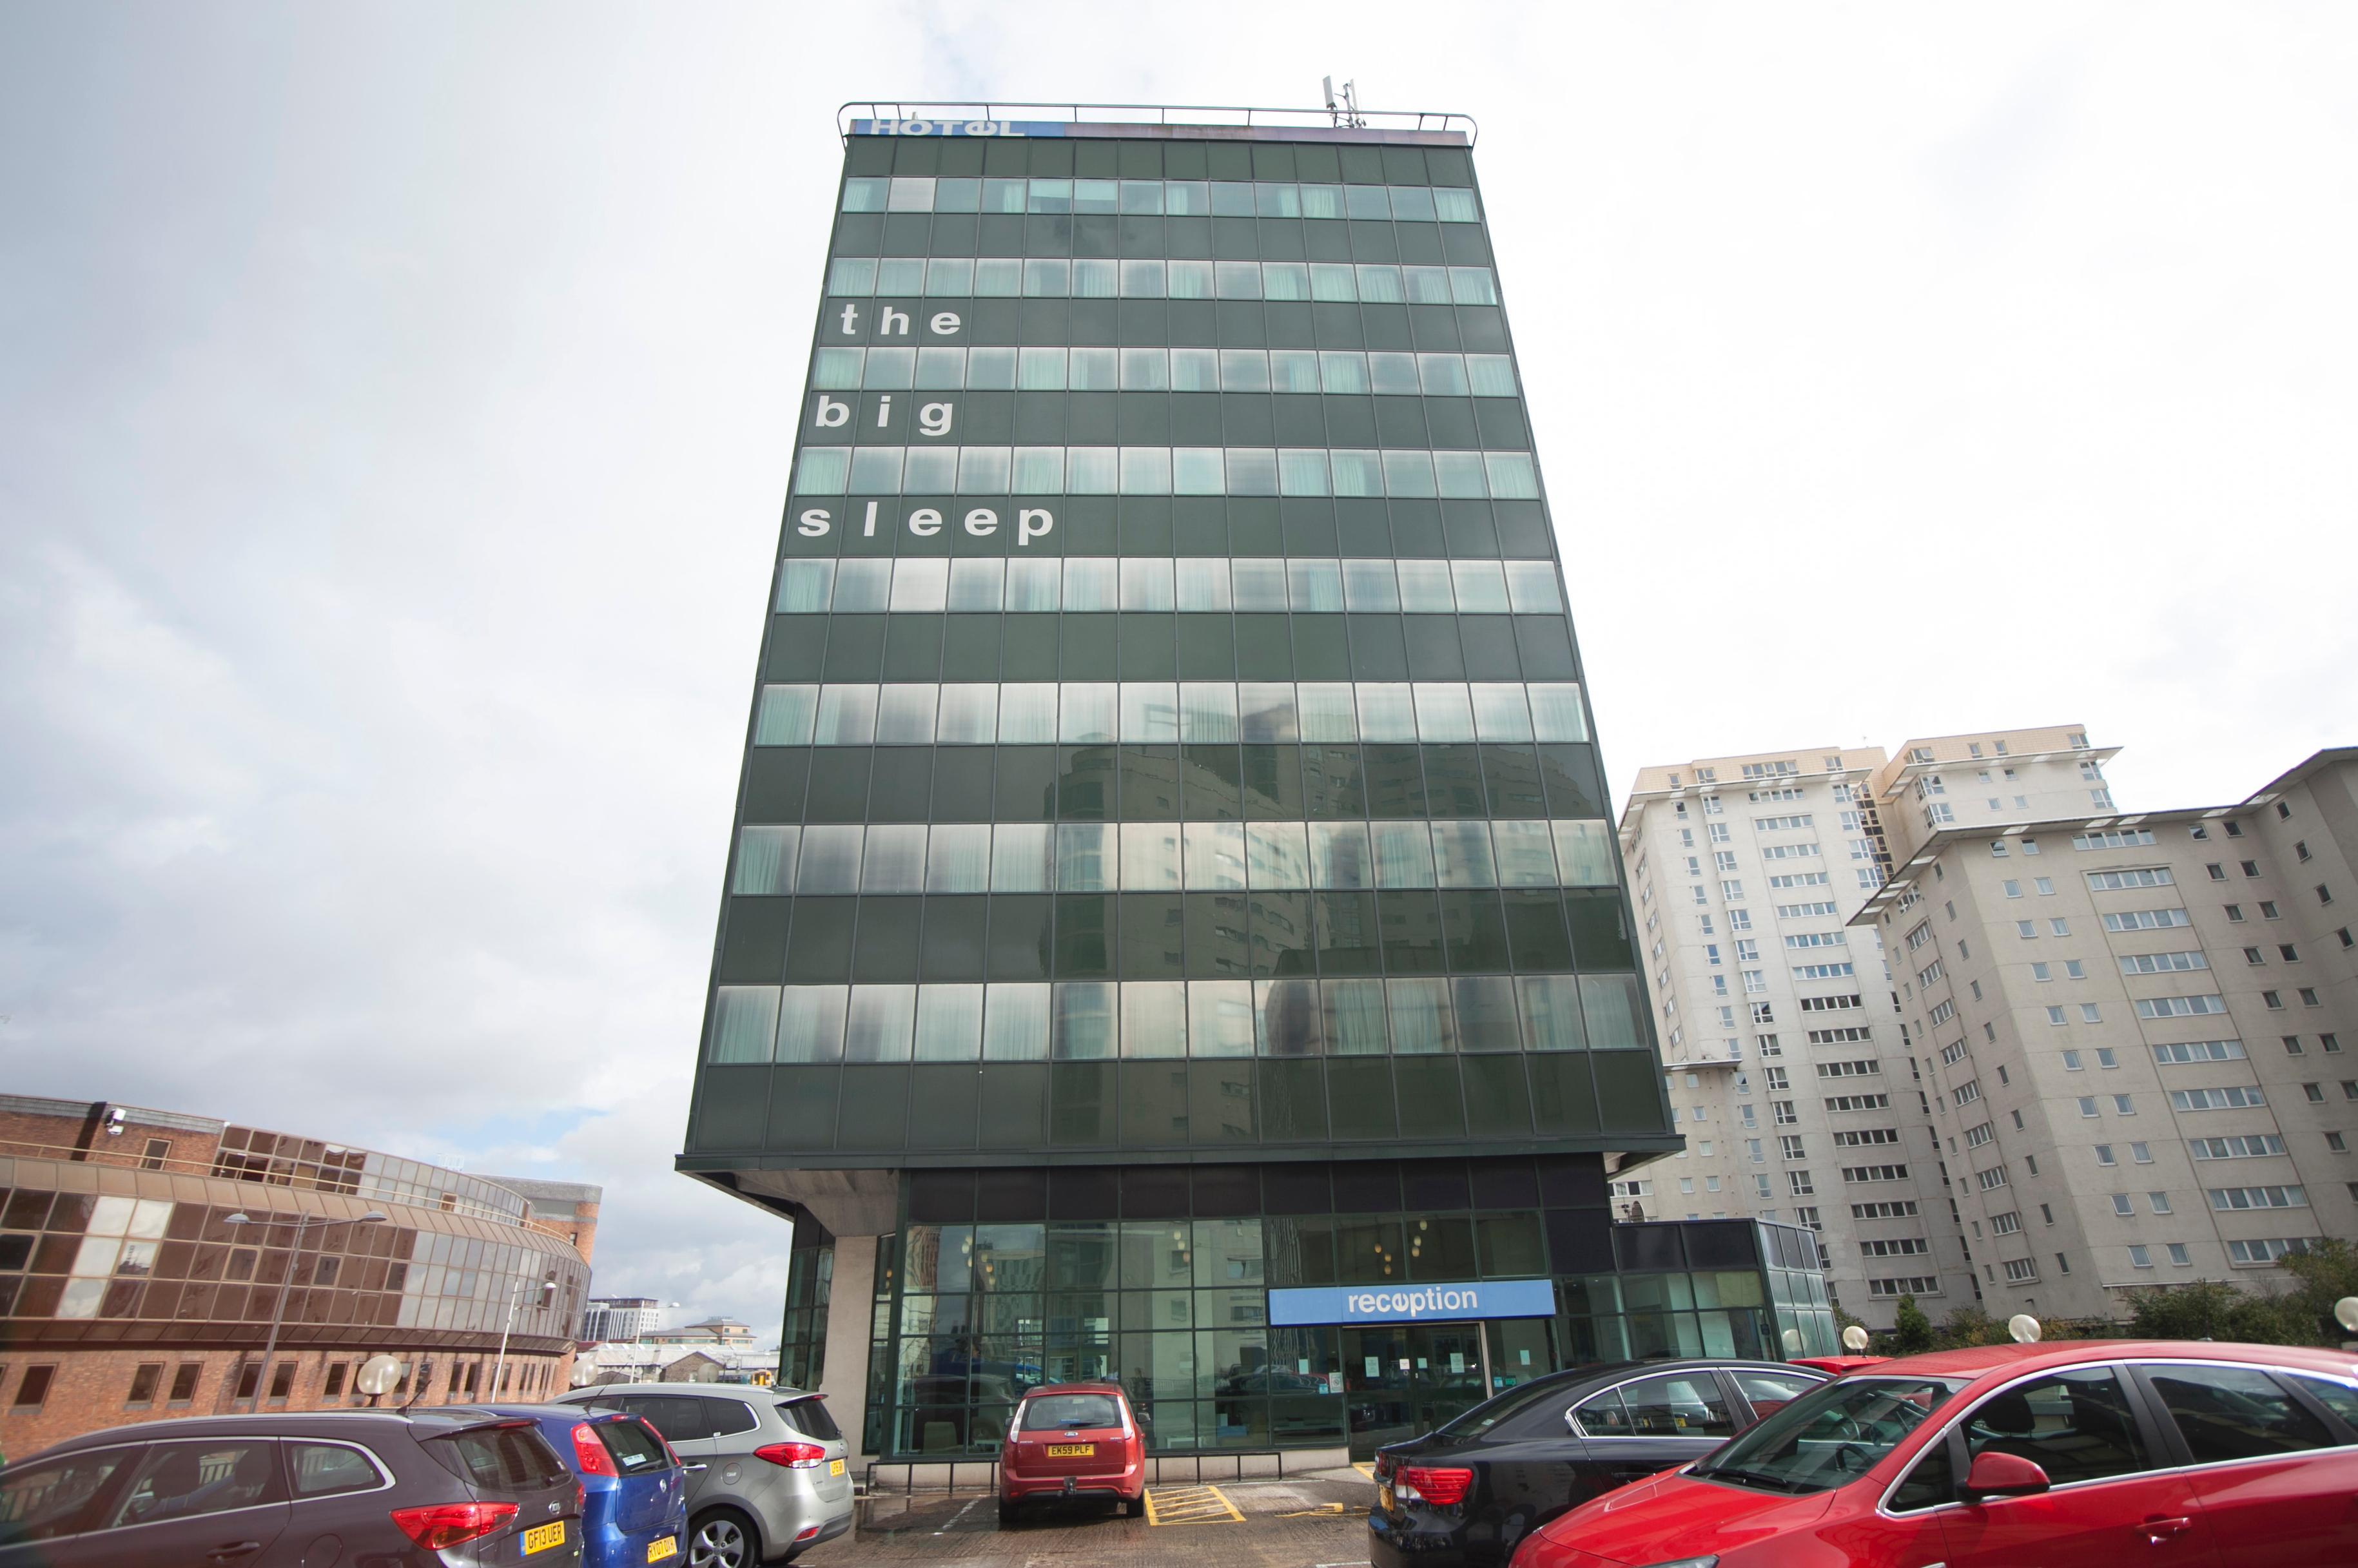 Citrus Hotel Cardiff By Compass Hospitality Exterior photo